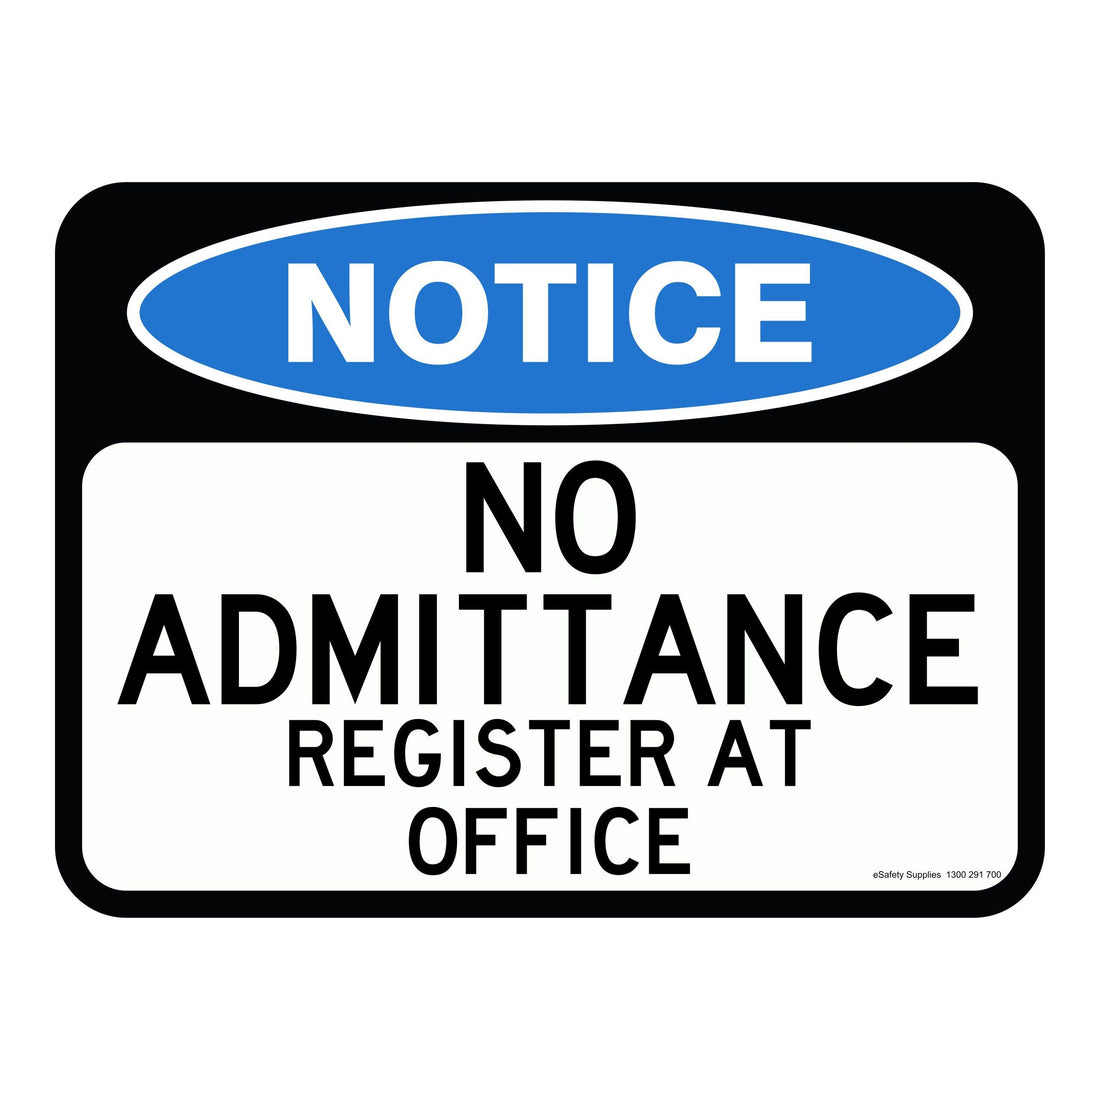 NOTICE - NO ADMITTANCE REGISTER AT OFFICE